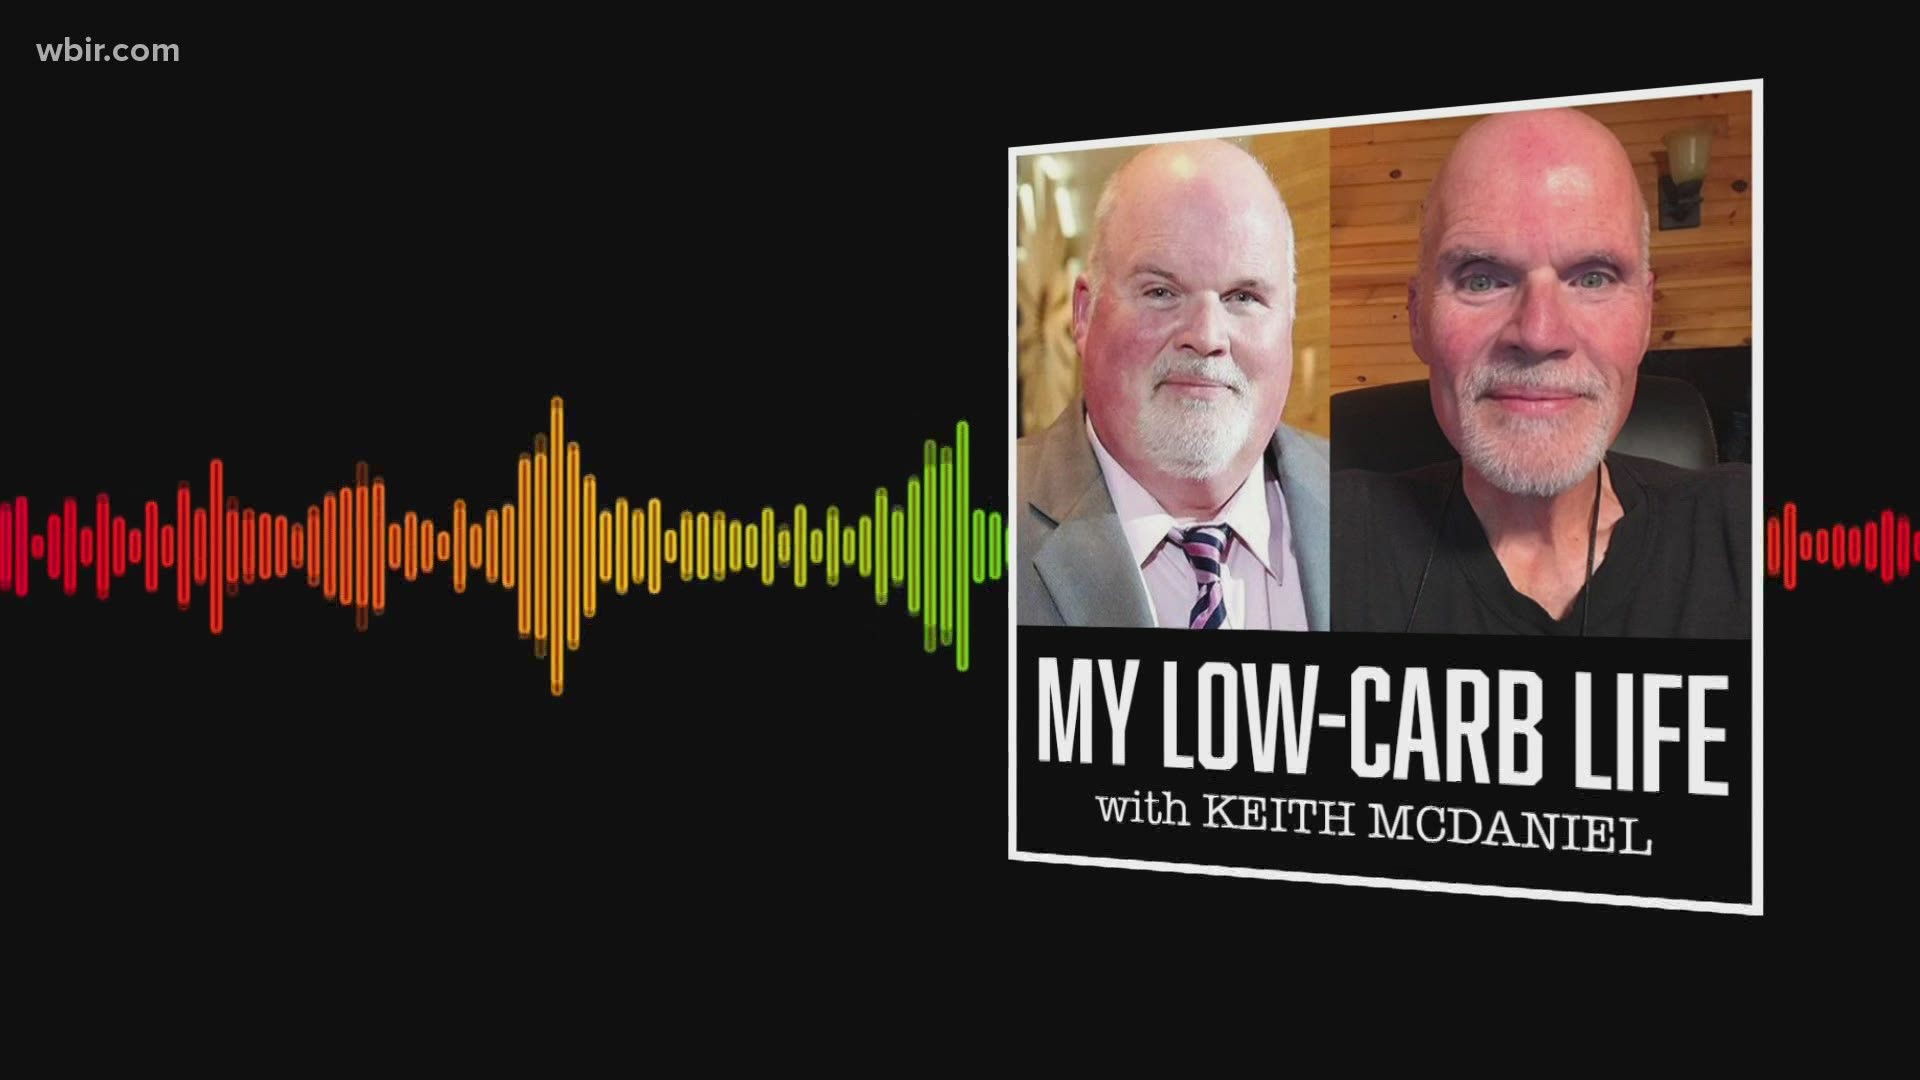 It's called 'My Low-Carb Life,' and Keith McDaniel said each episode will feature interviews experts and some easy recipes that worked well for him